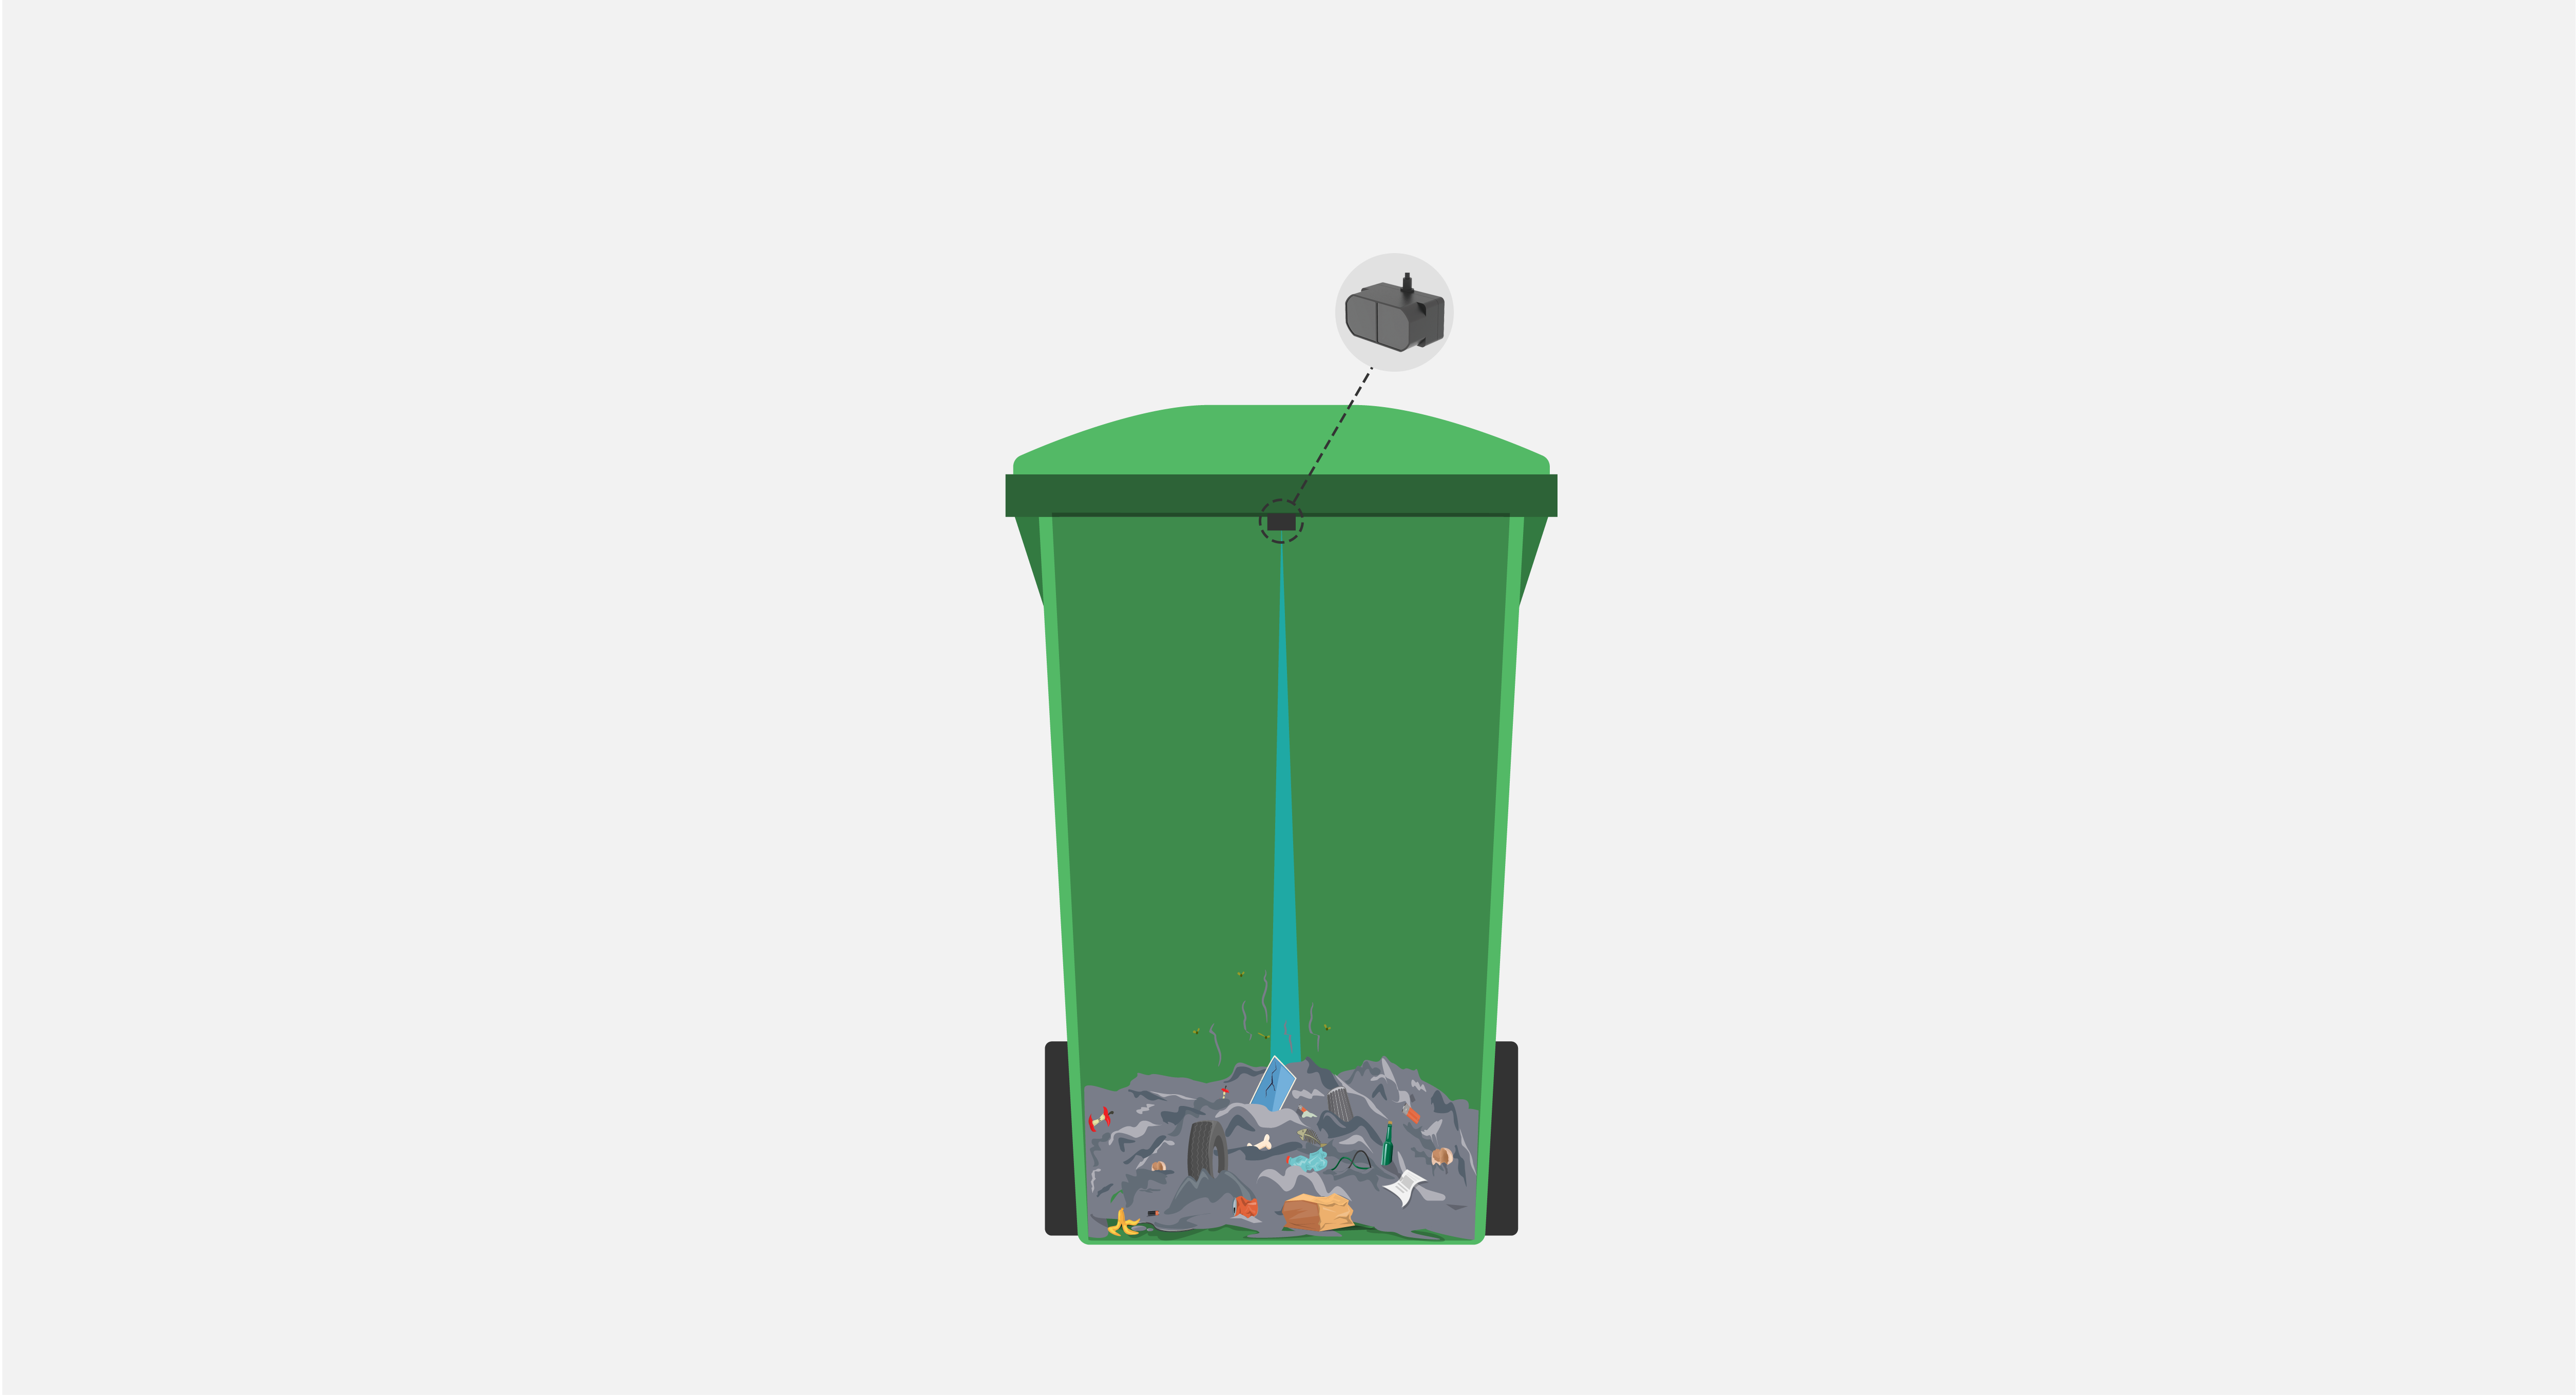 File:Fullness sensor for tall but small waste bins.png